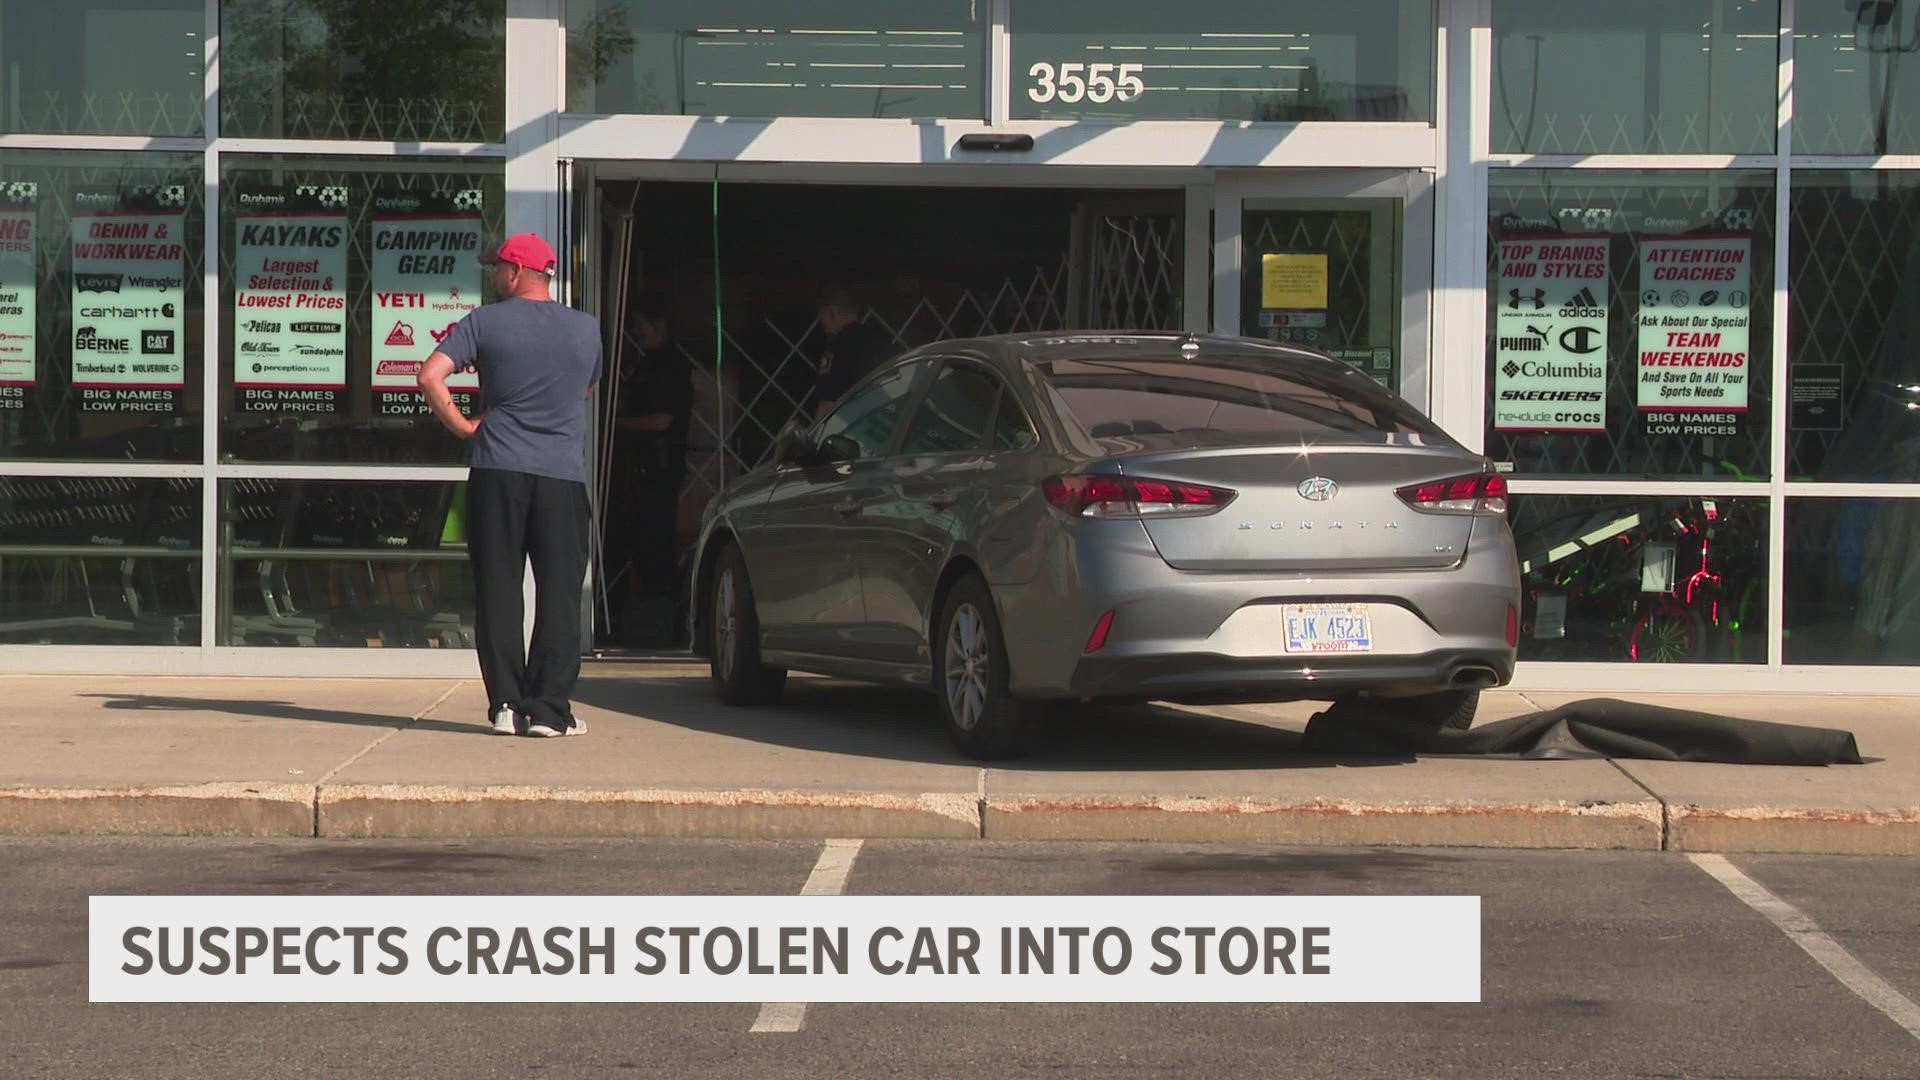 Police say four suspects fled the scene on foot after crashing a stolen vehicle into the storefront.